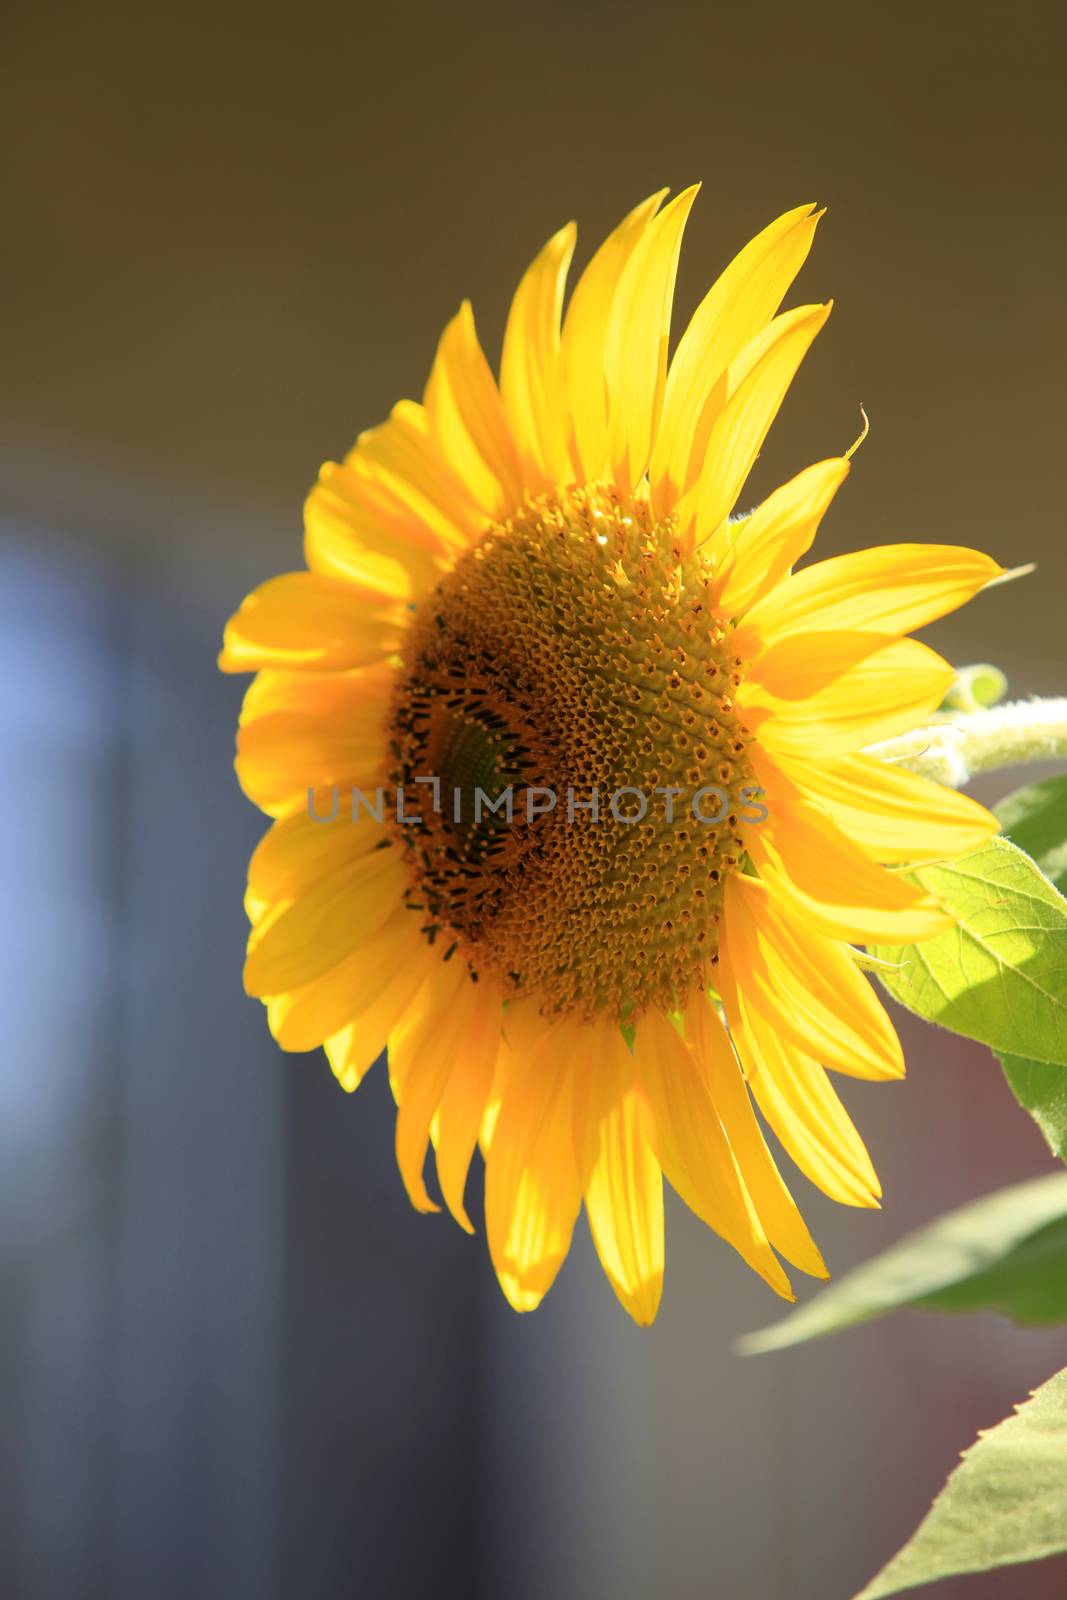 Flower of a sunflower on a background